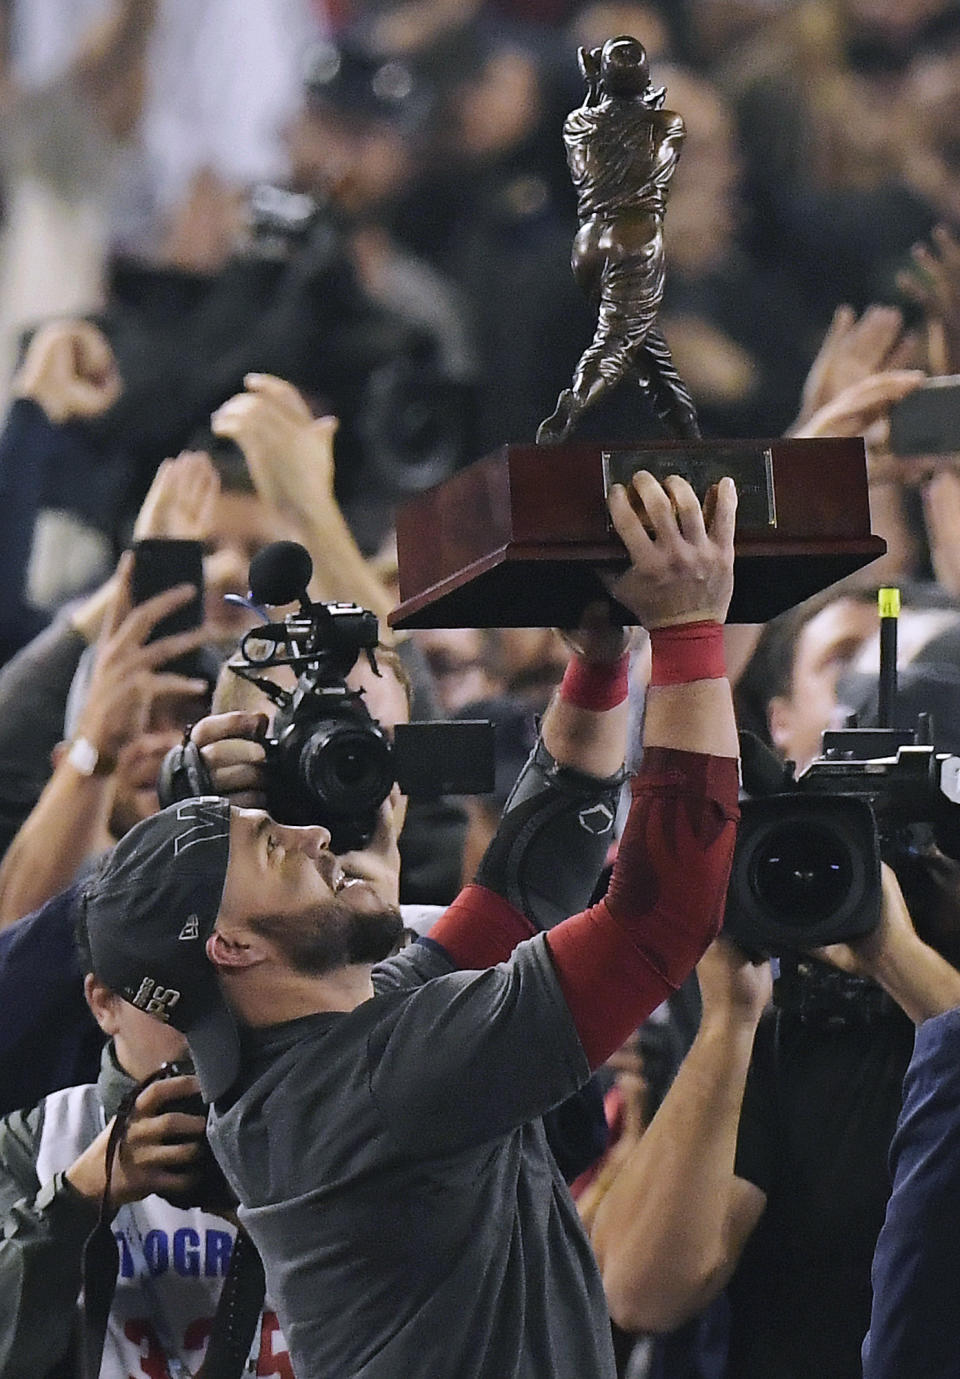 Boston Red Sox's Steve Pearce holds the MVP trophy after Game 5 of baseball's World Series against the Los Angeles Dodgers on Sunday, Oct. 28, 2018, in Los Angeles. The Red Sox won 5-1 to win the series 4 game to 1. (AP Photo/Mark J. Terrill)